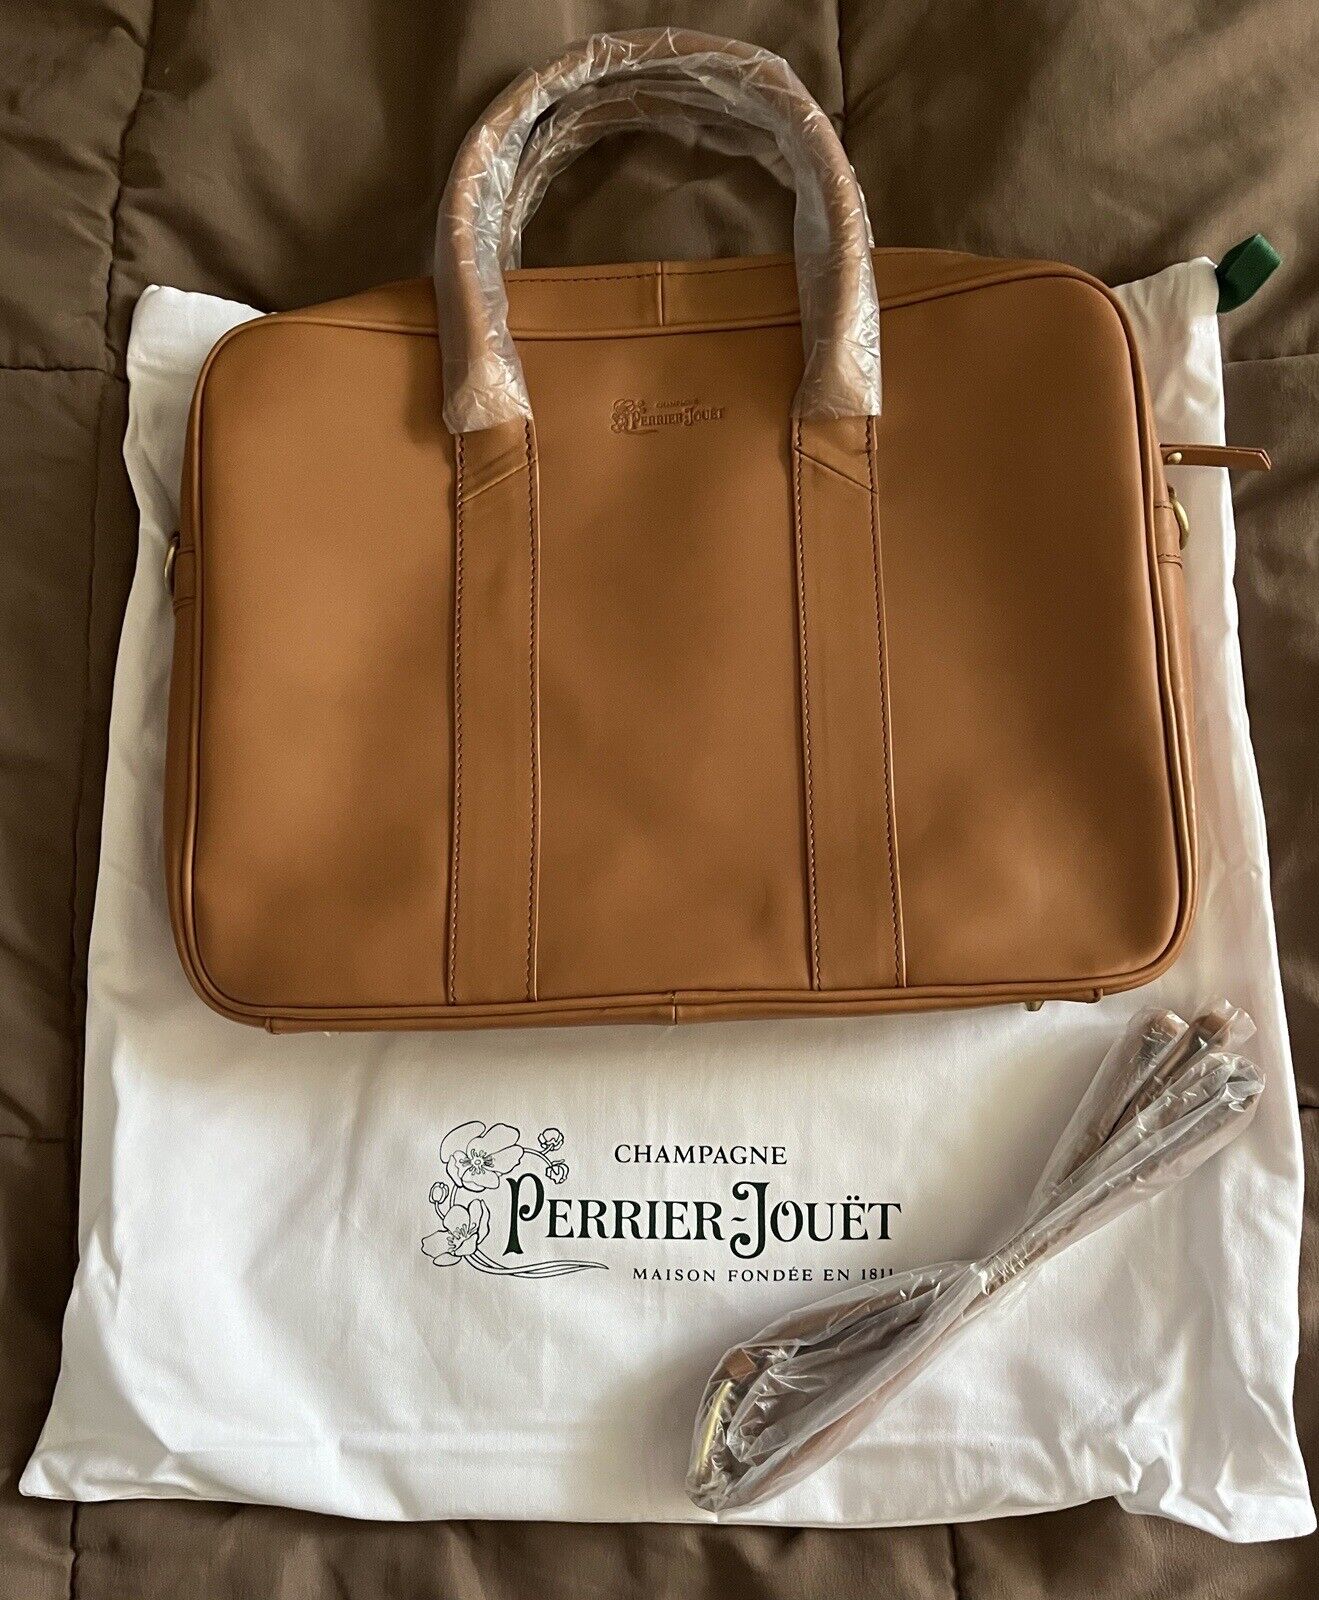 Perrier Jouet Champagne Leather Laptop Bag With Cloth Protective Bag *BRAND NEW*